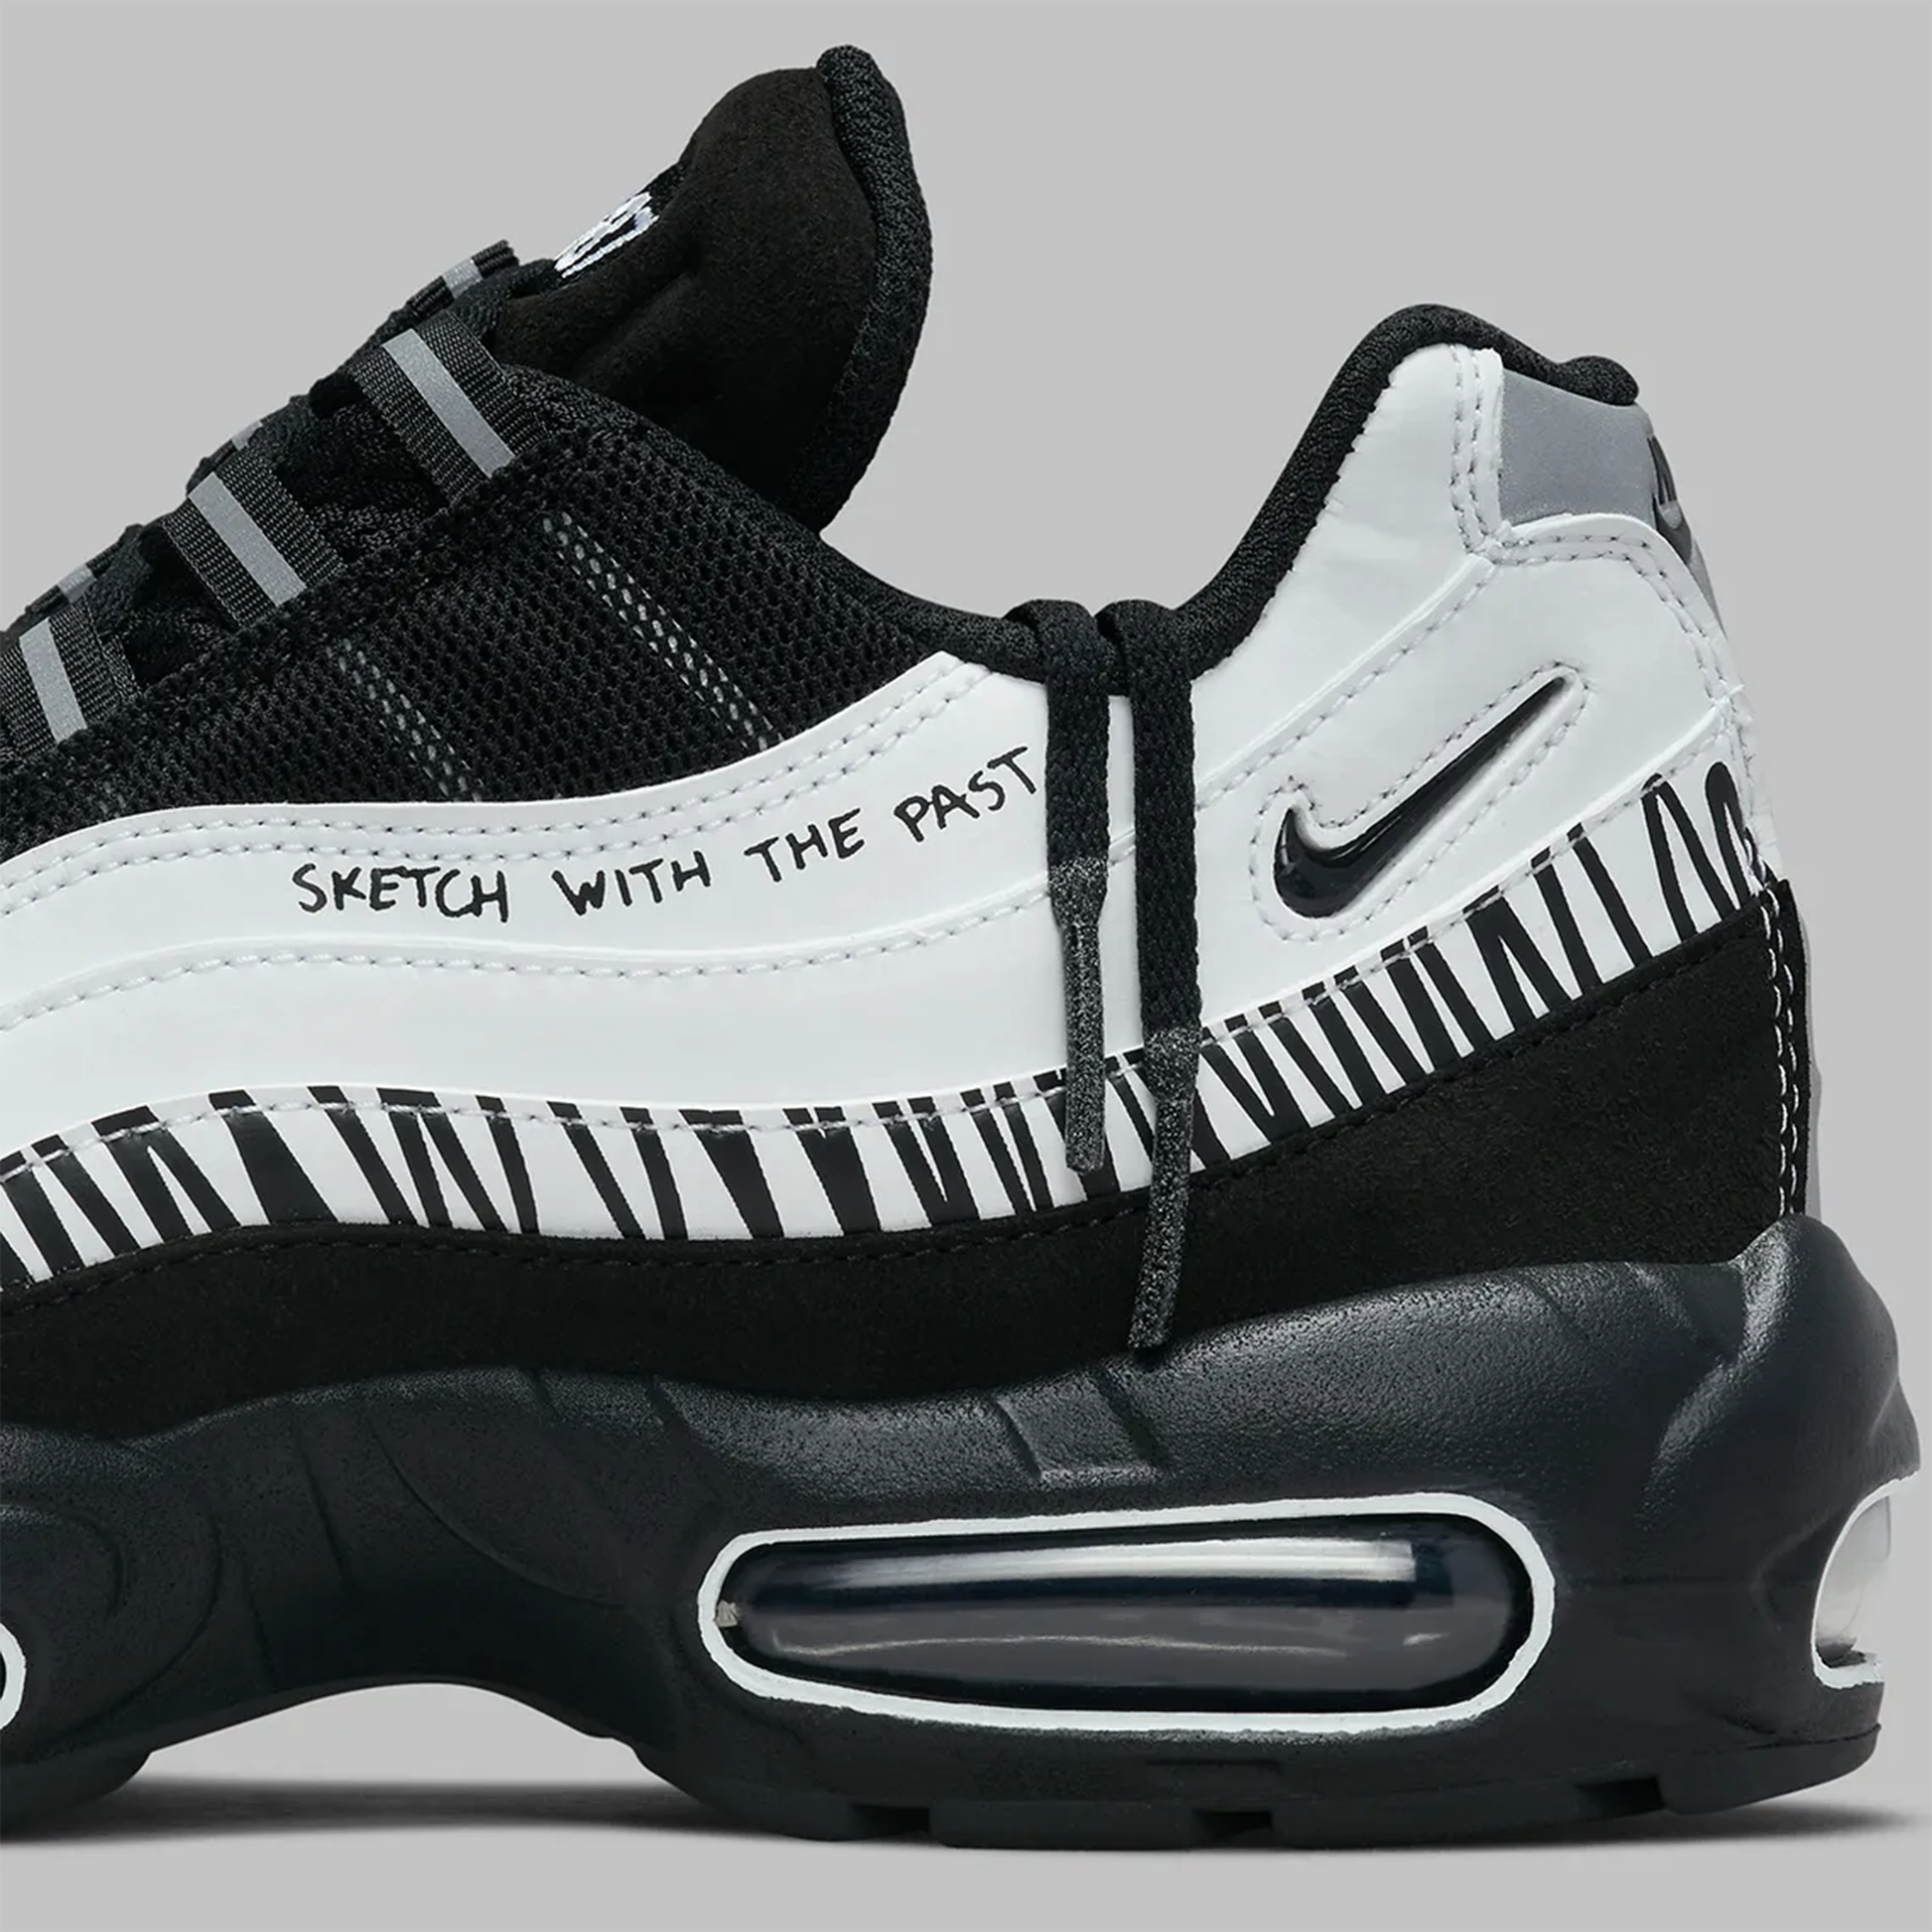 Nike Air Max 95 SP Future Movement Sketch With The Past